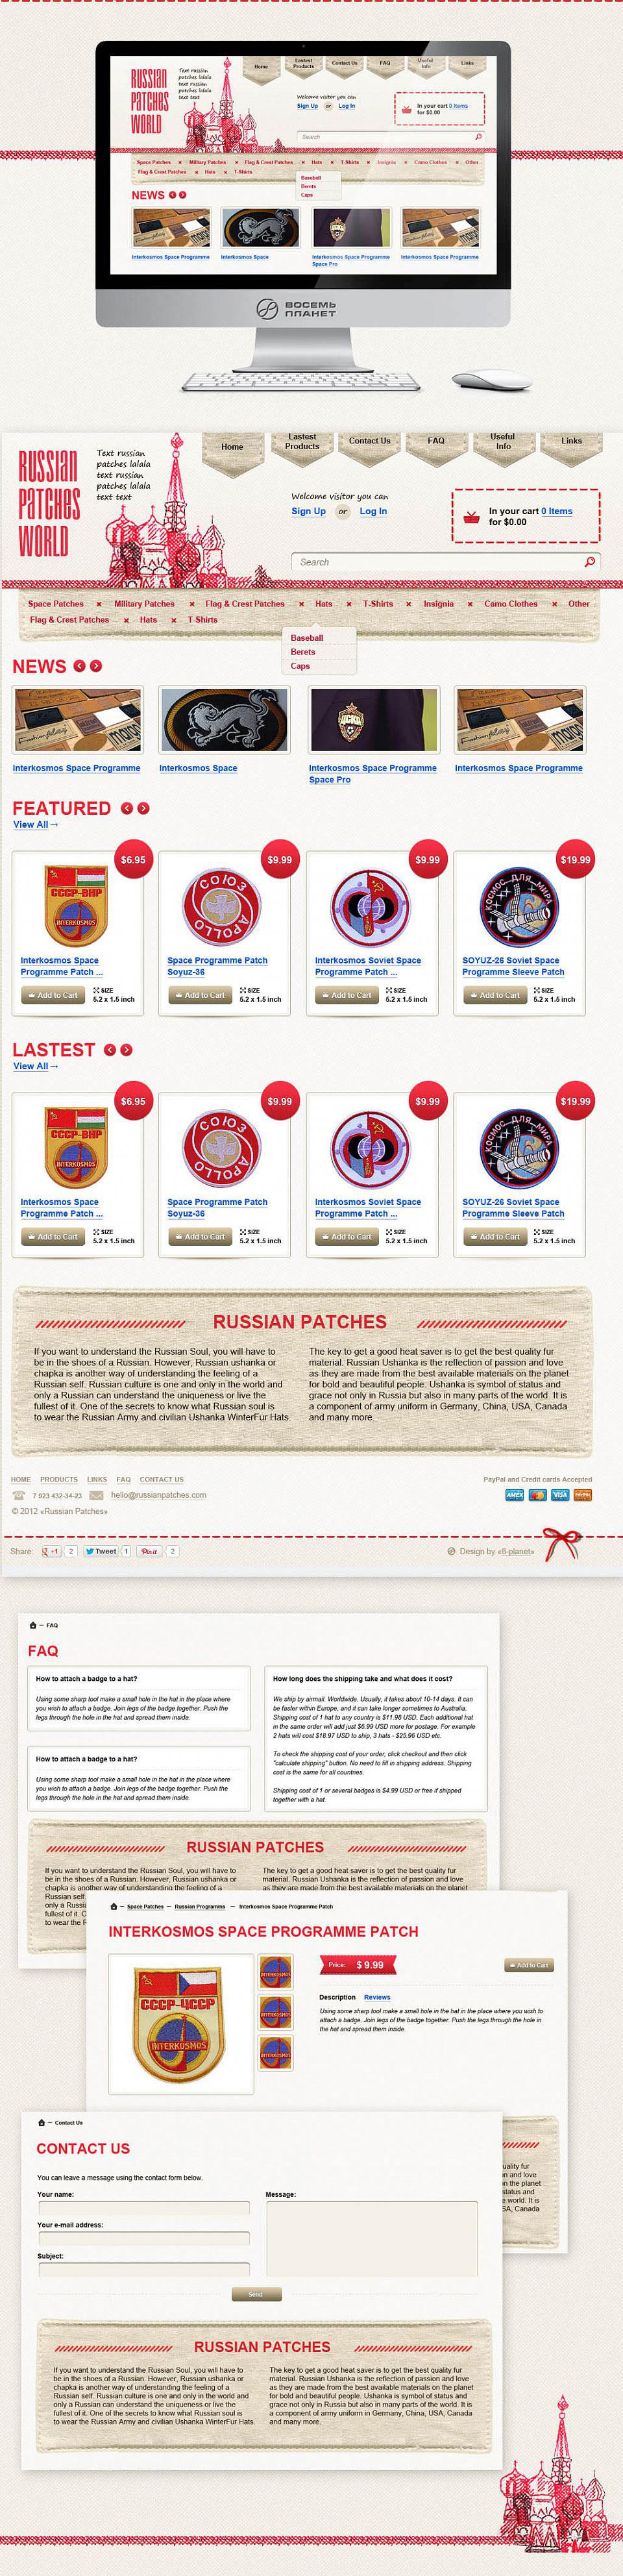 "Russian Patches World"